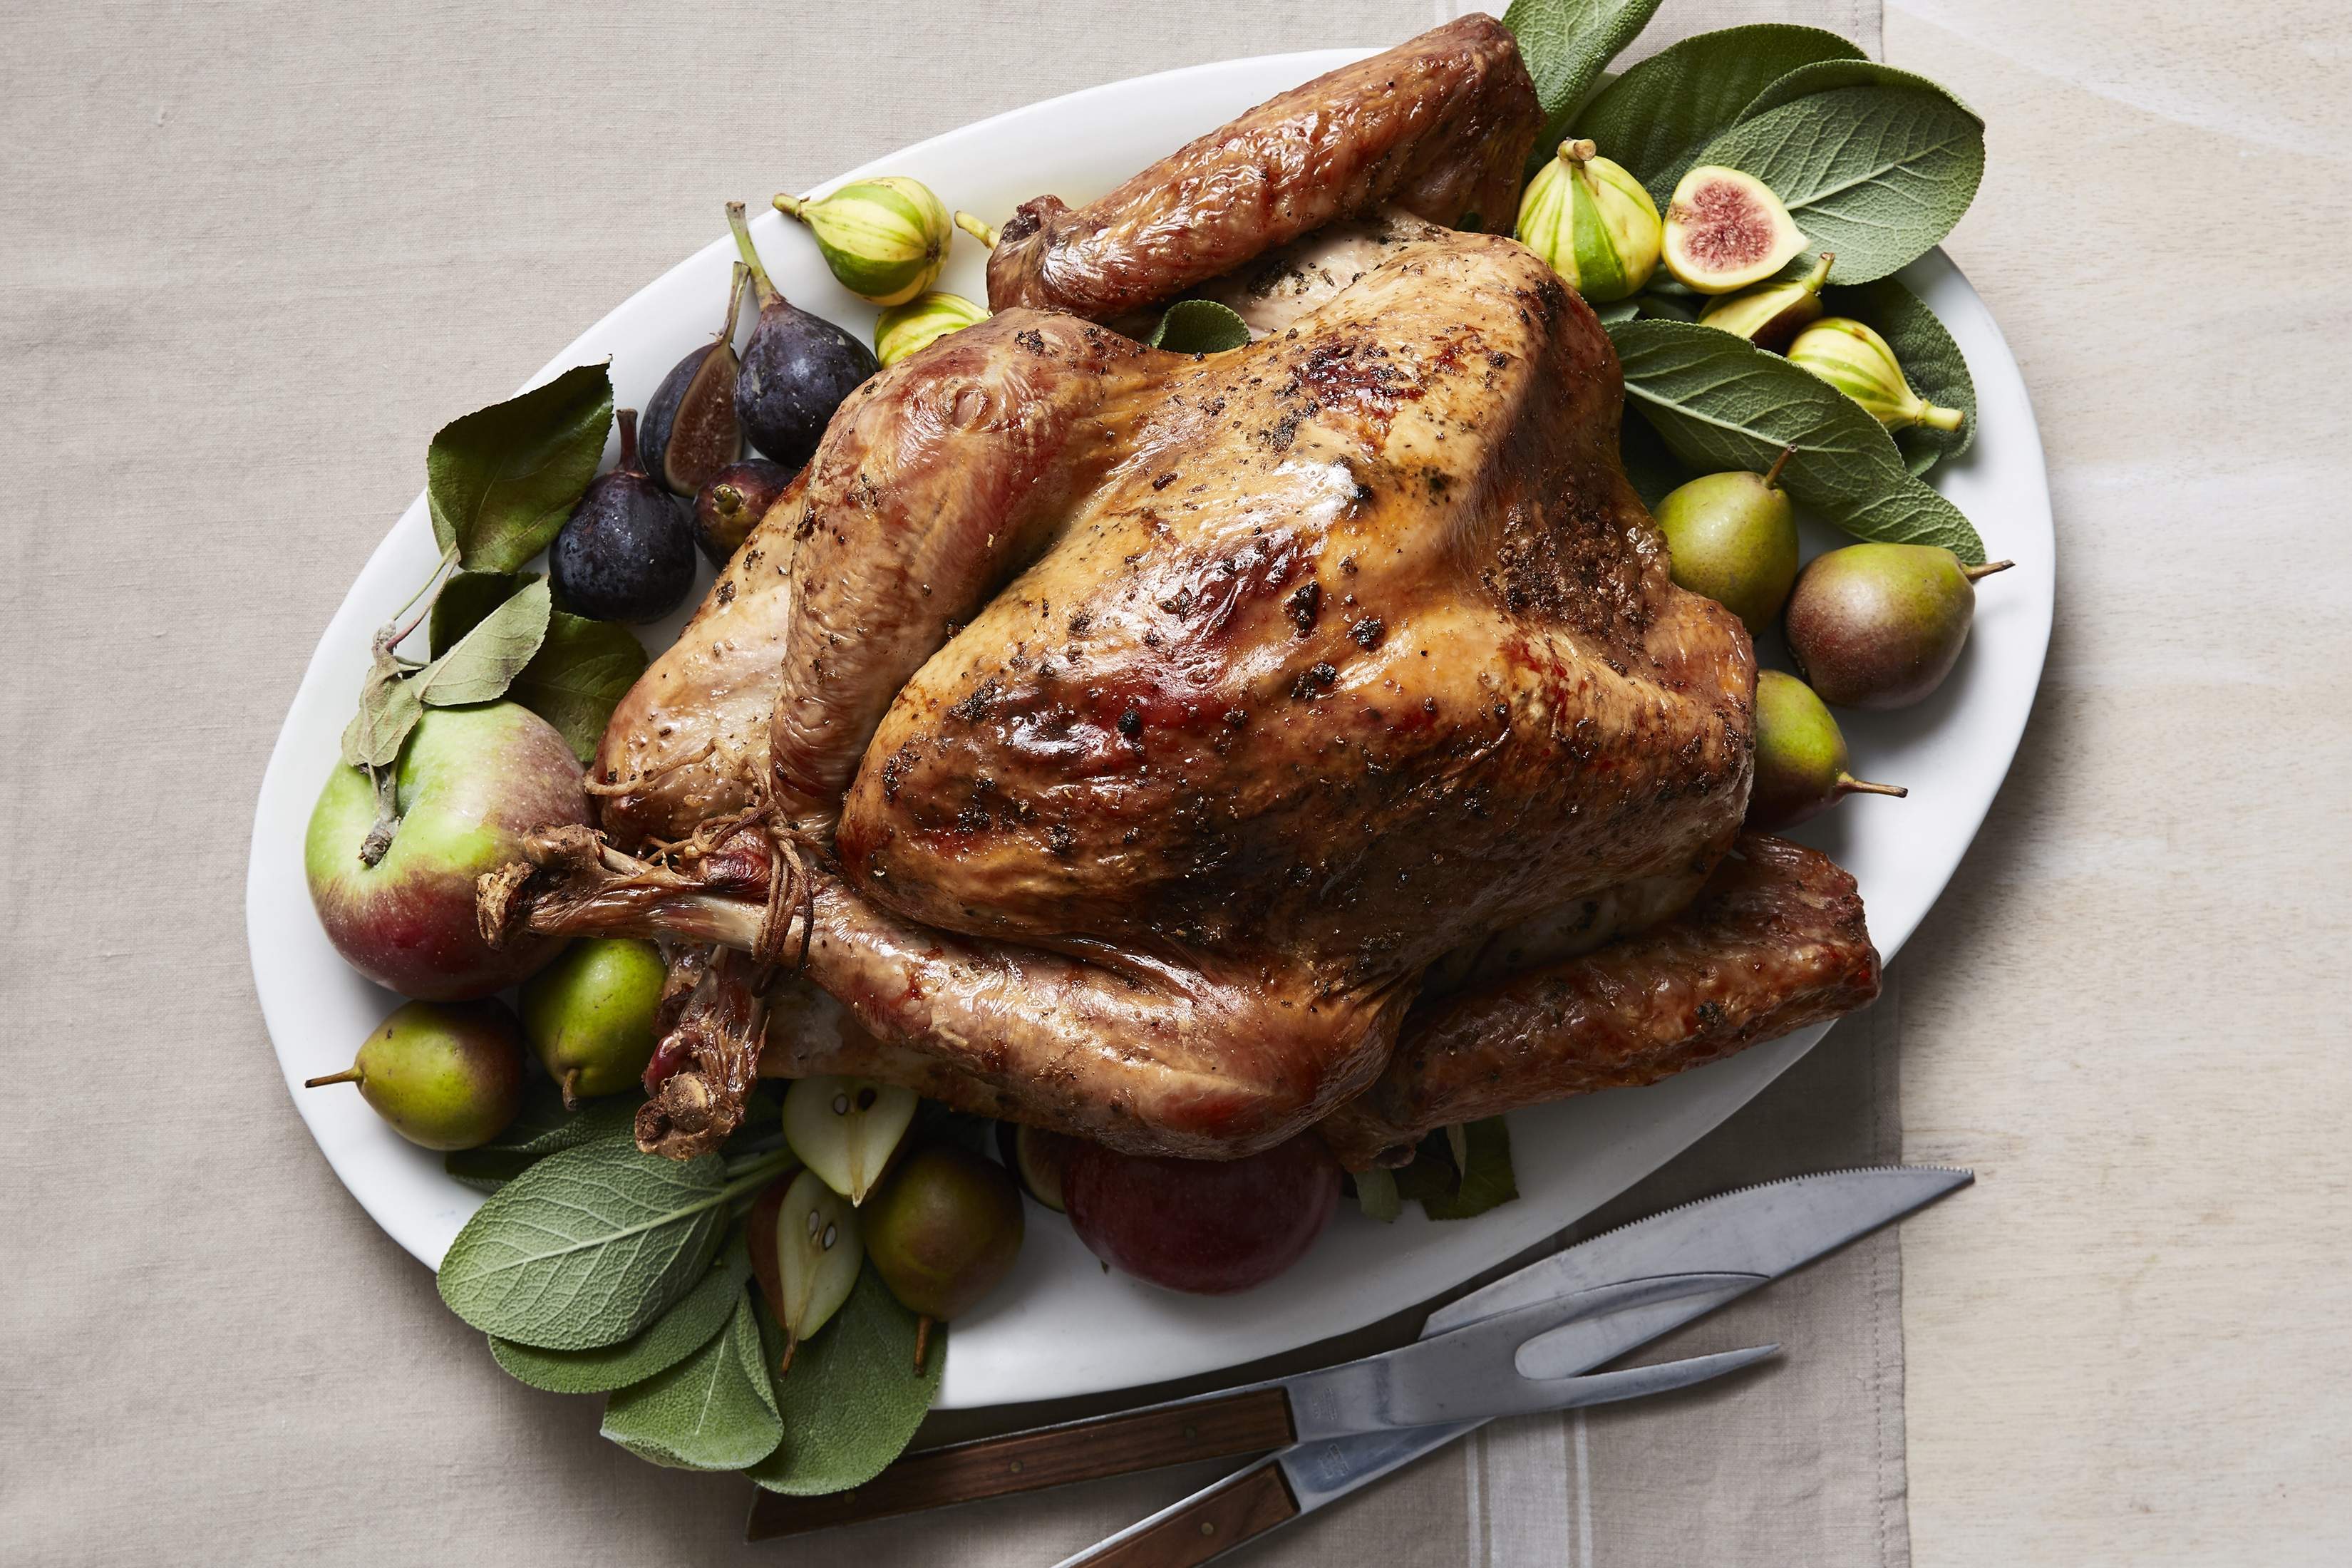 Don't want to cook a Thanksgiving feast? Where to make